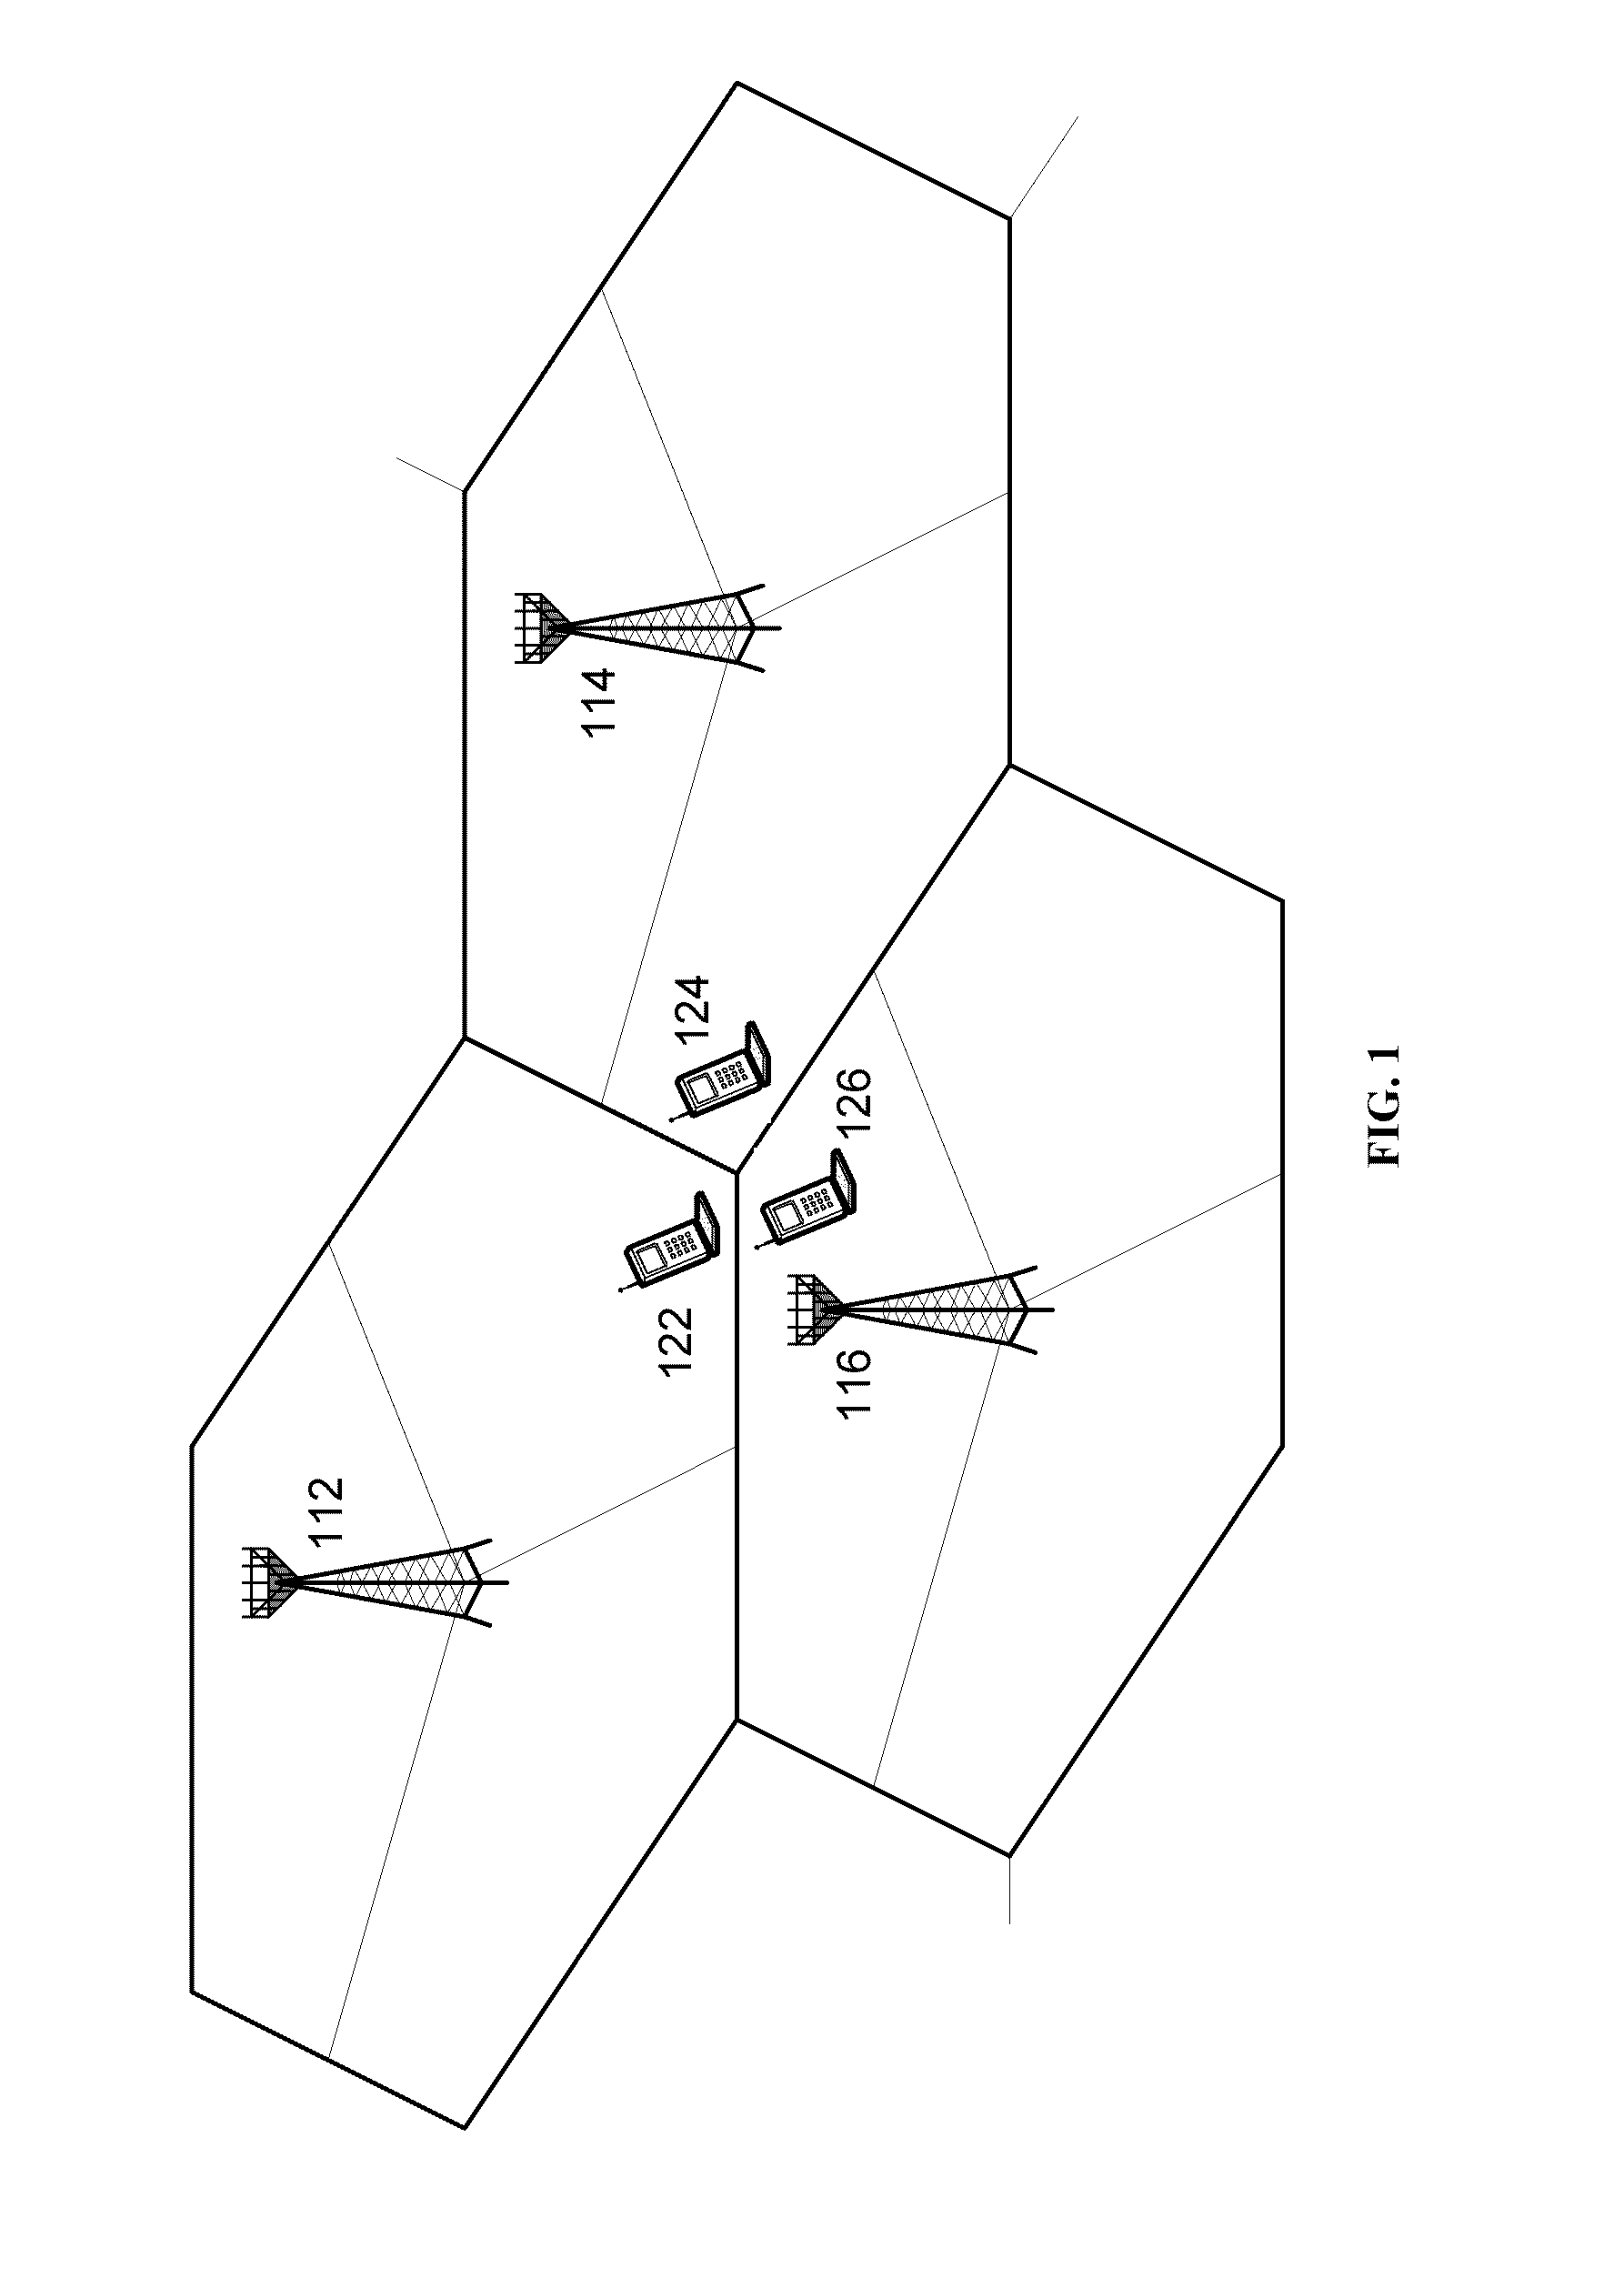 Coordinated Multi-Point Transmission and Multi-User MIMO